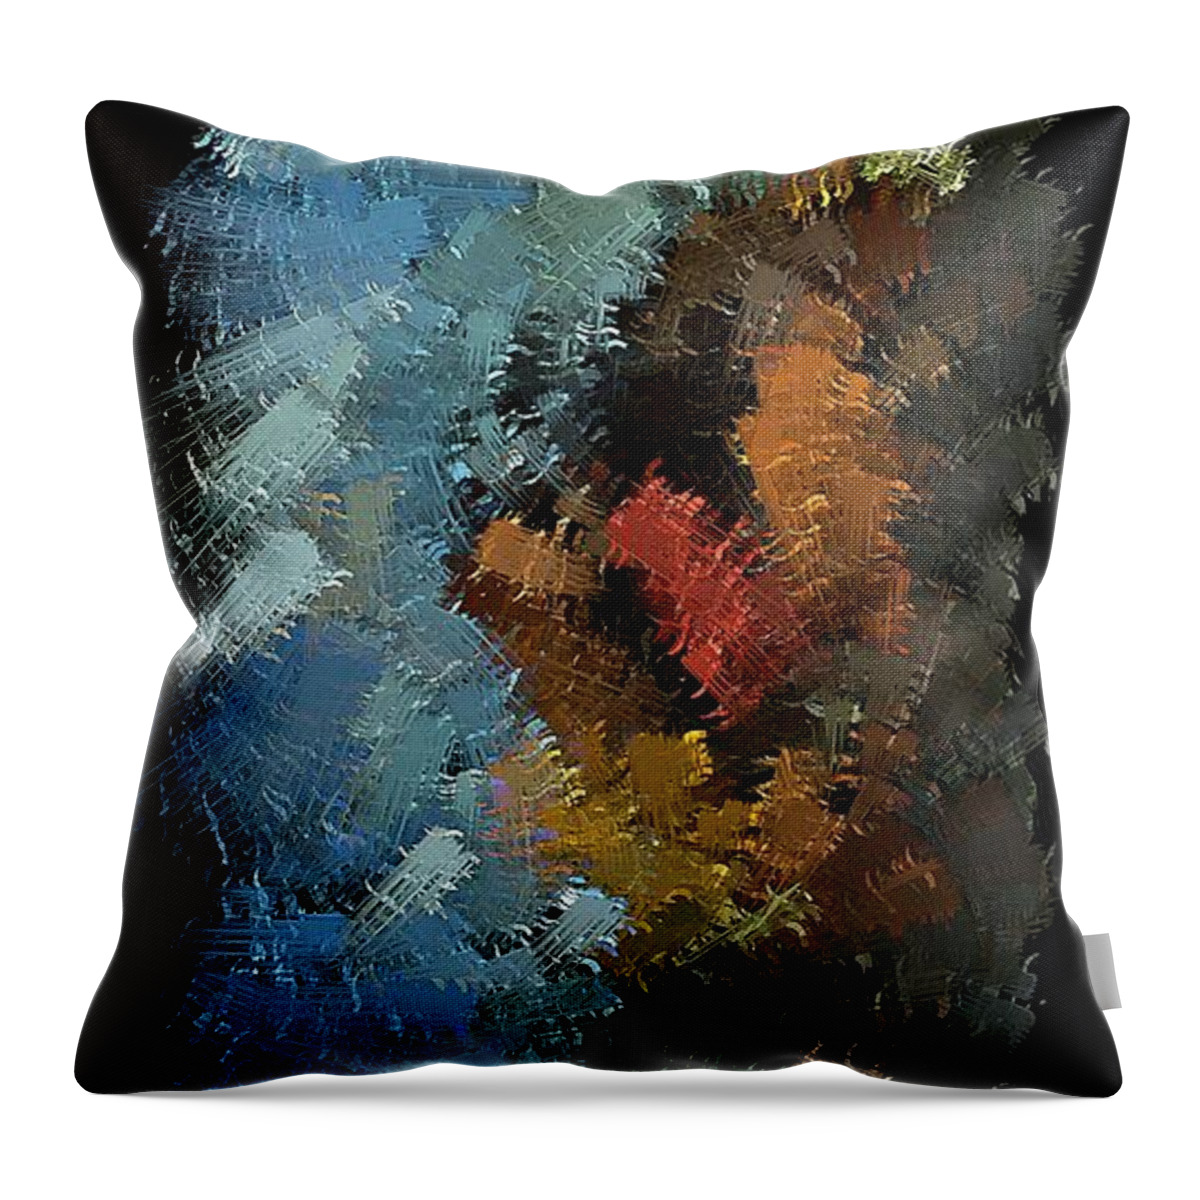 Earth Throw Pillow featuring the digital art Illusion 1 by David Manlove